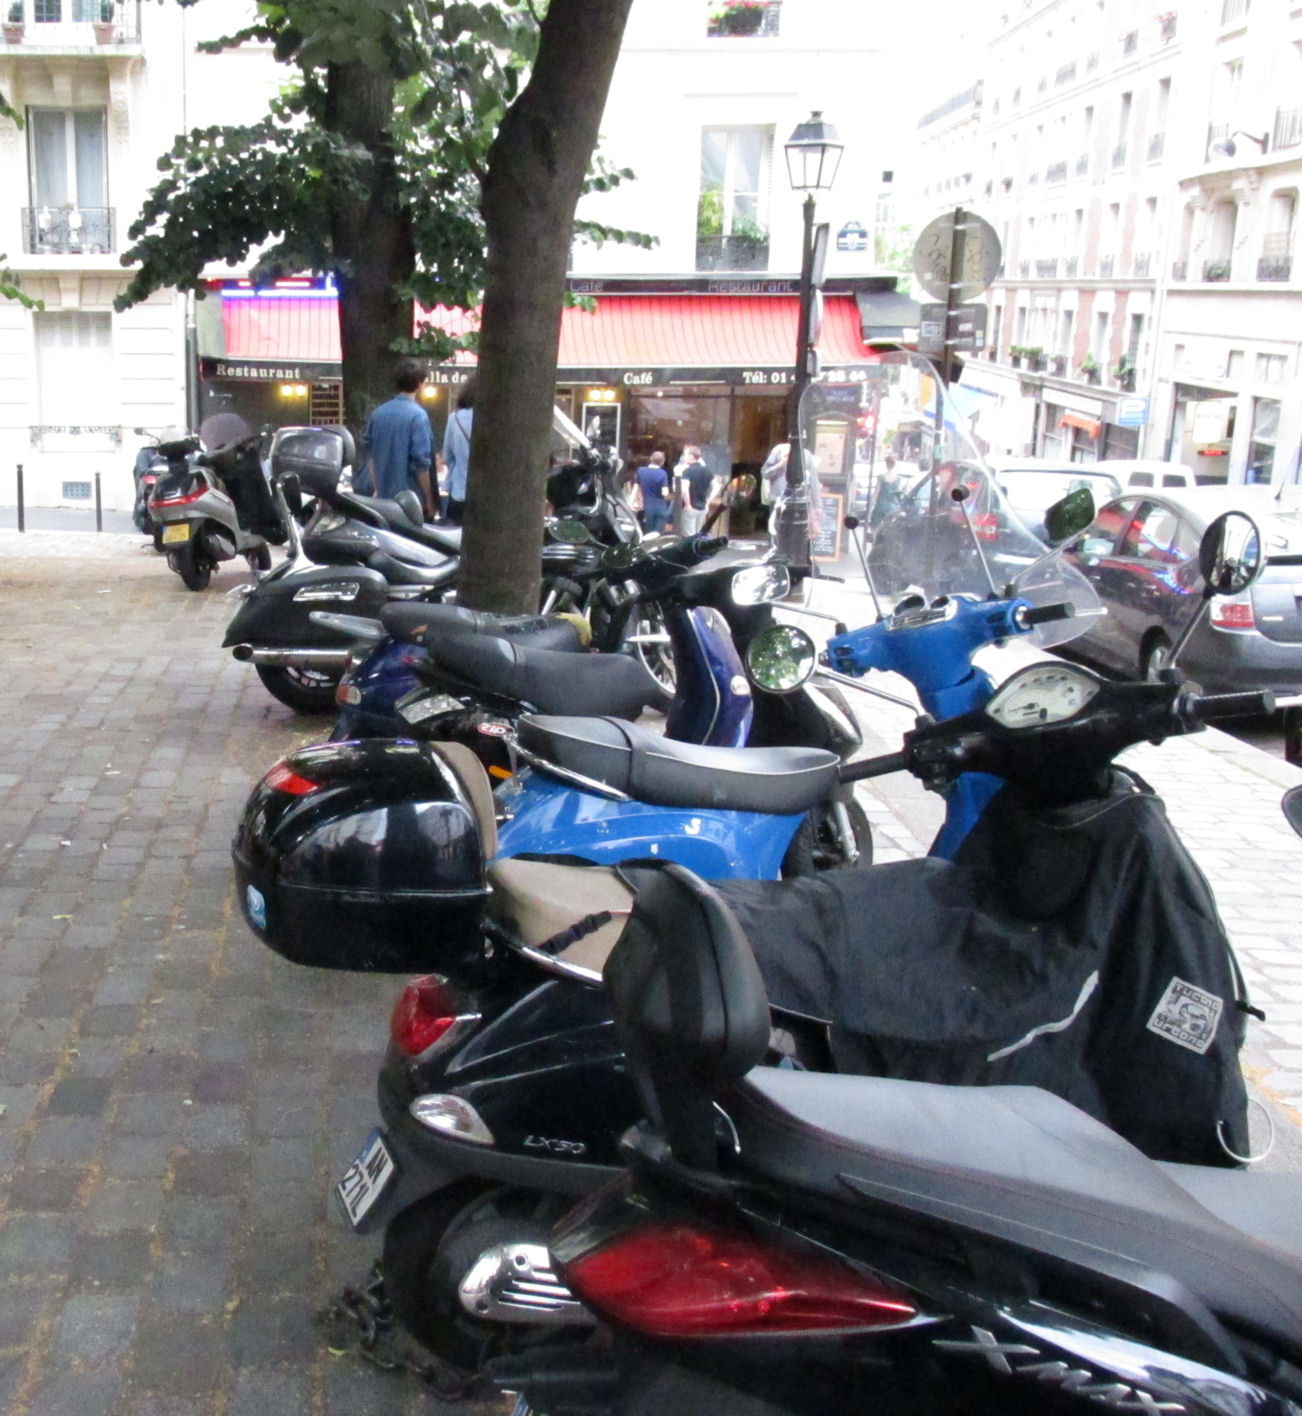 Scooters are plentiful and are parked anywhere their drivers can find a spot.